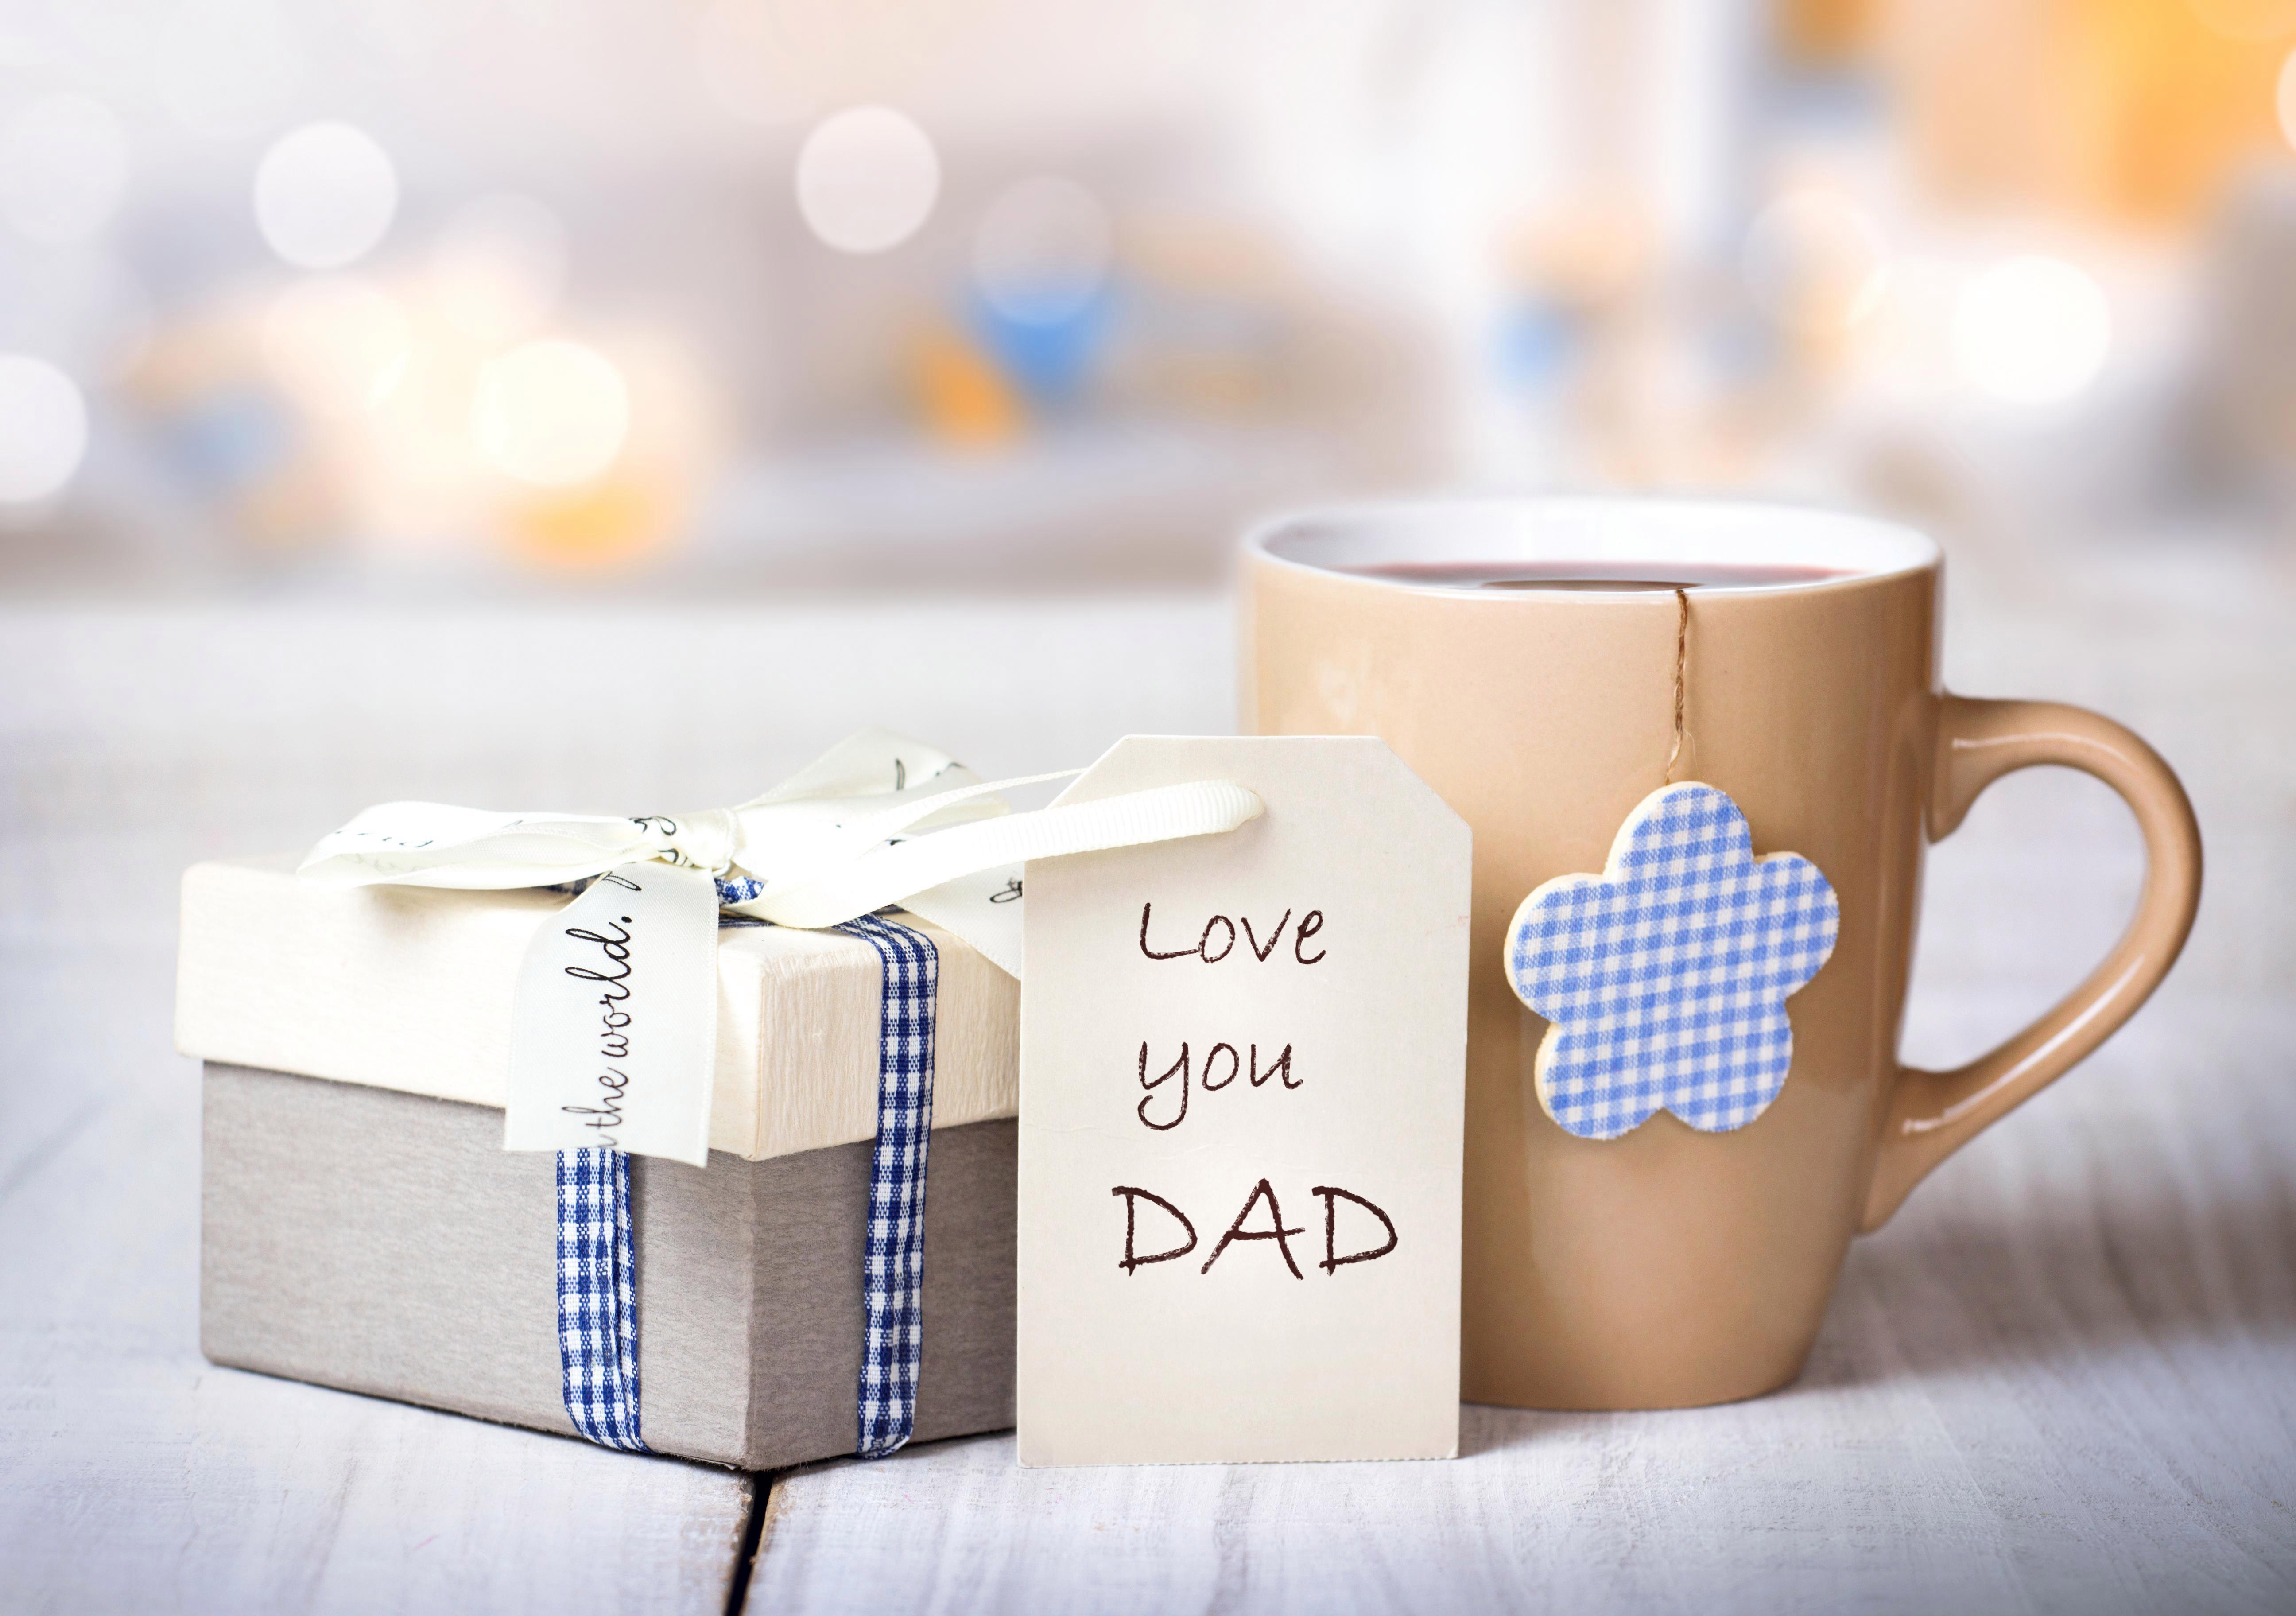 Father's Day 2019 Is TODAY! Great Last Minute Gifts For Your Dad